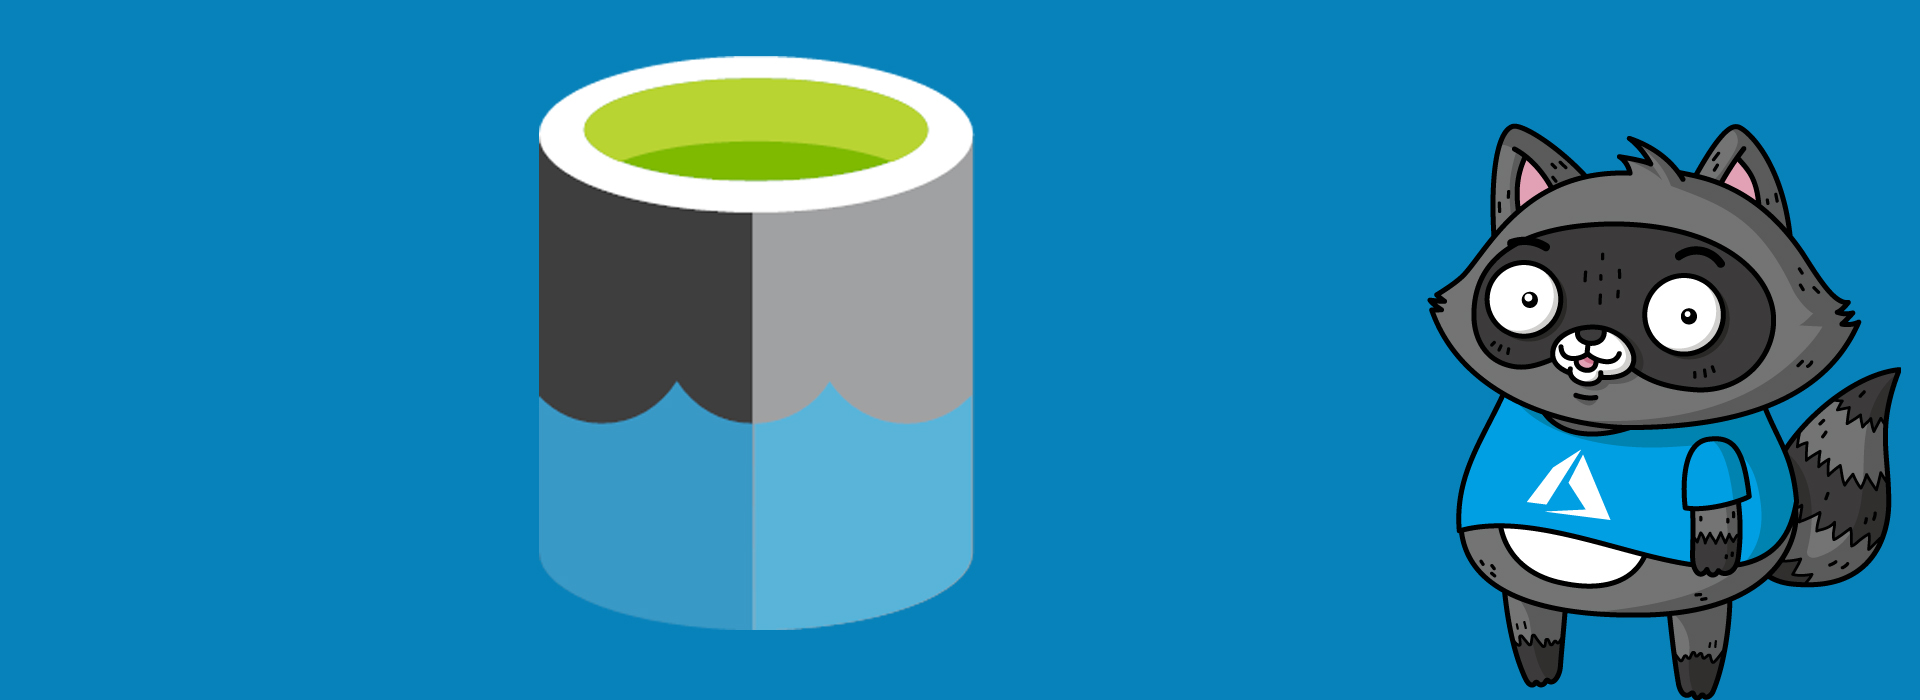 The Azure Data Lake Storage logo on a blue background, next to a picture of Bit the Raccoon.